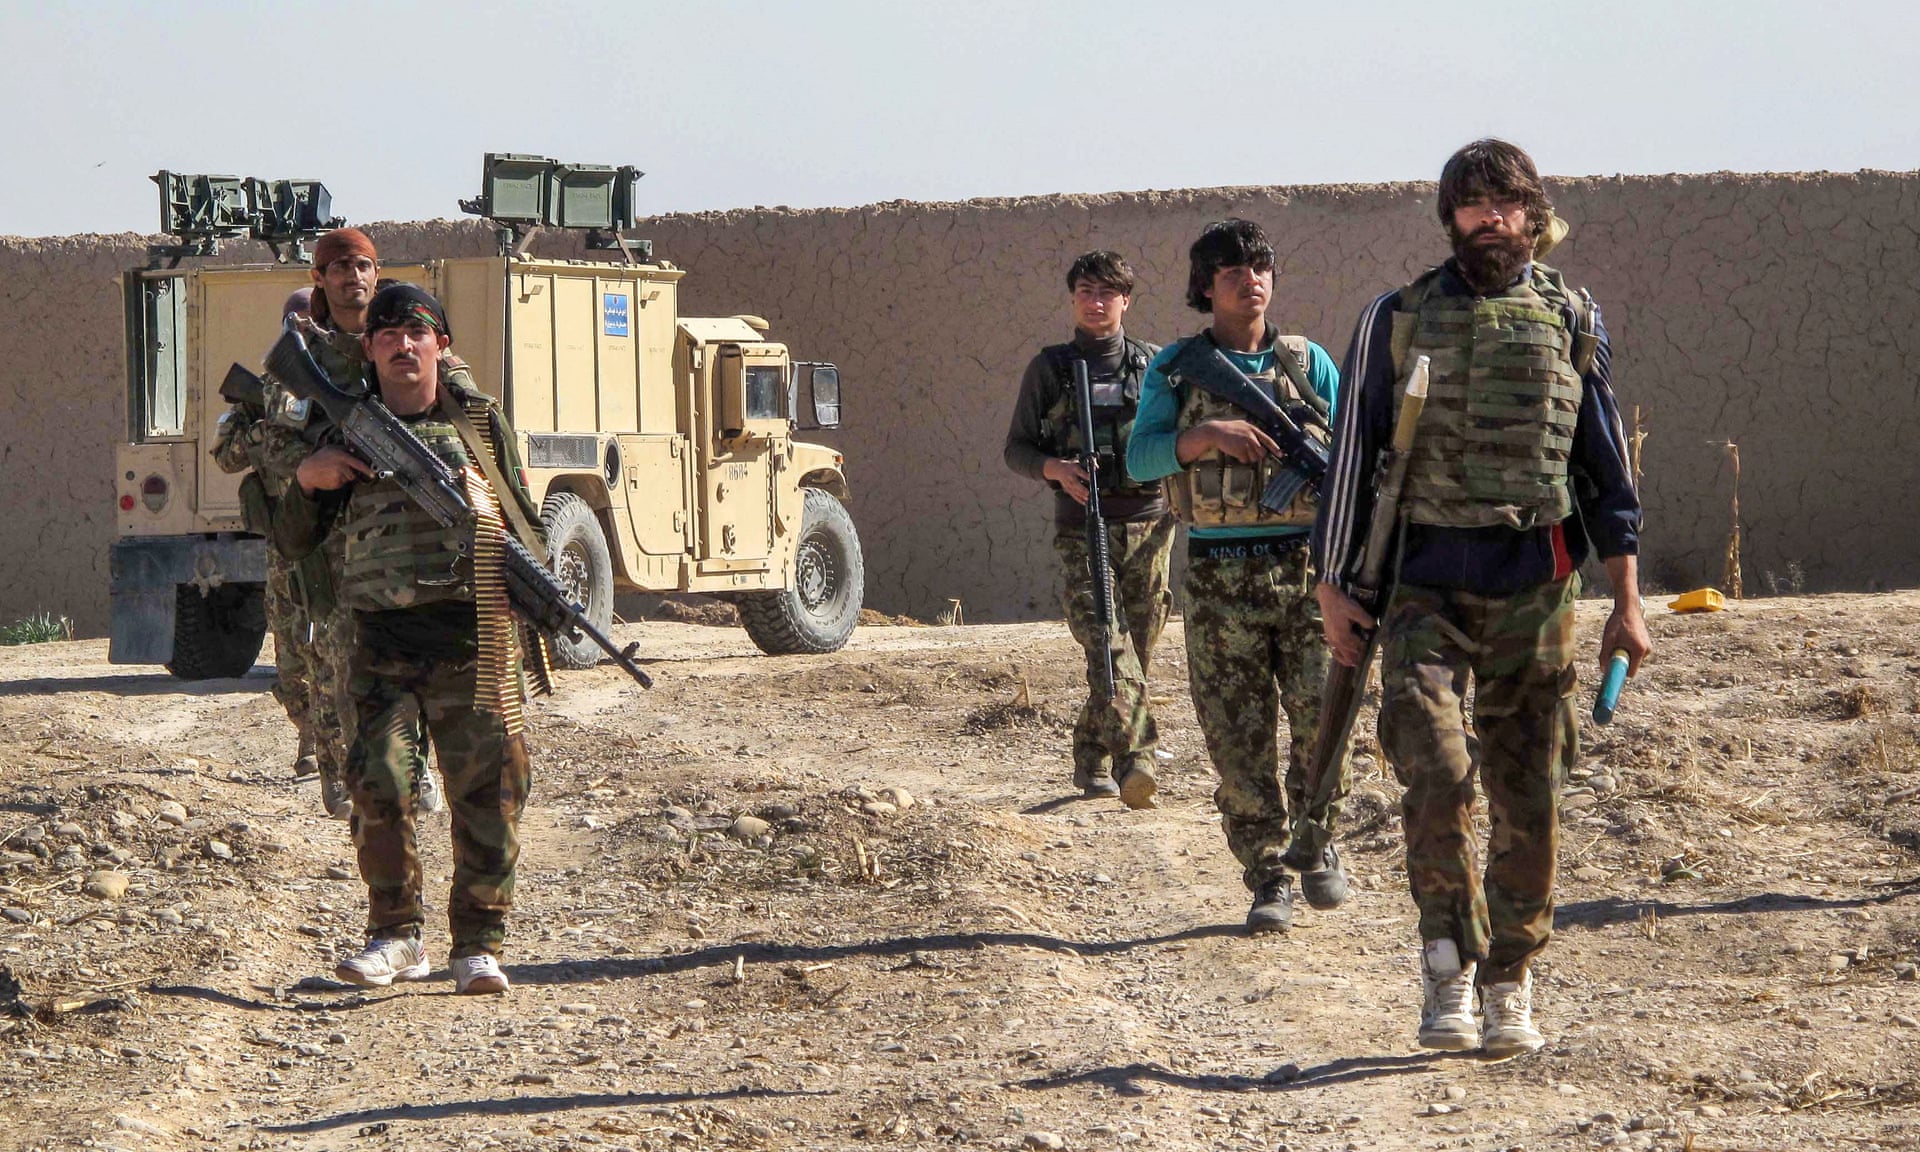 Afghan soldiers patrolling an area in Helmand Province.